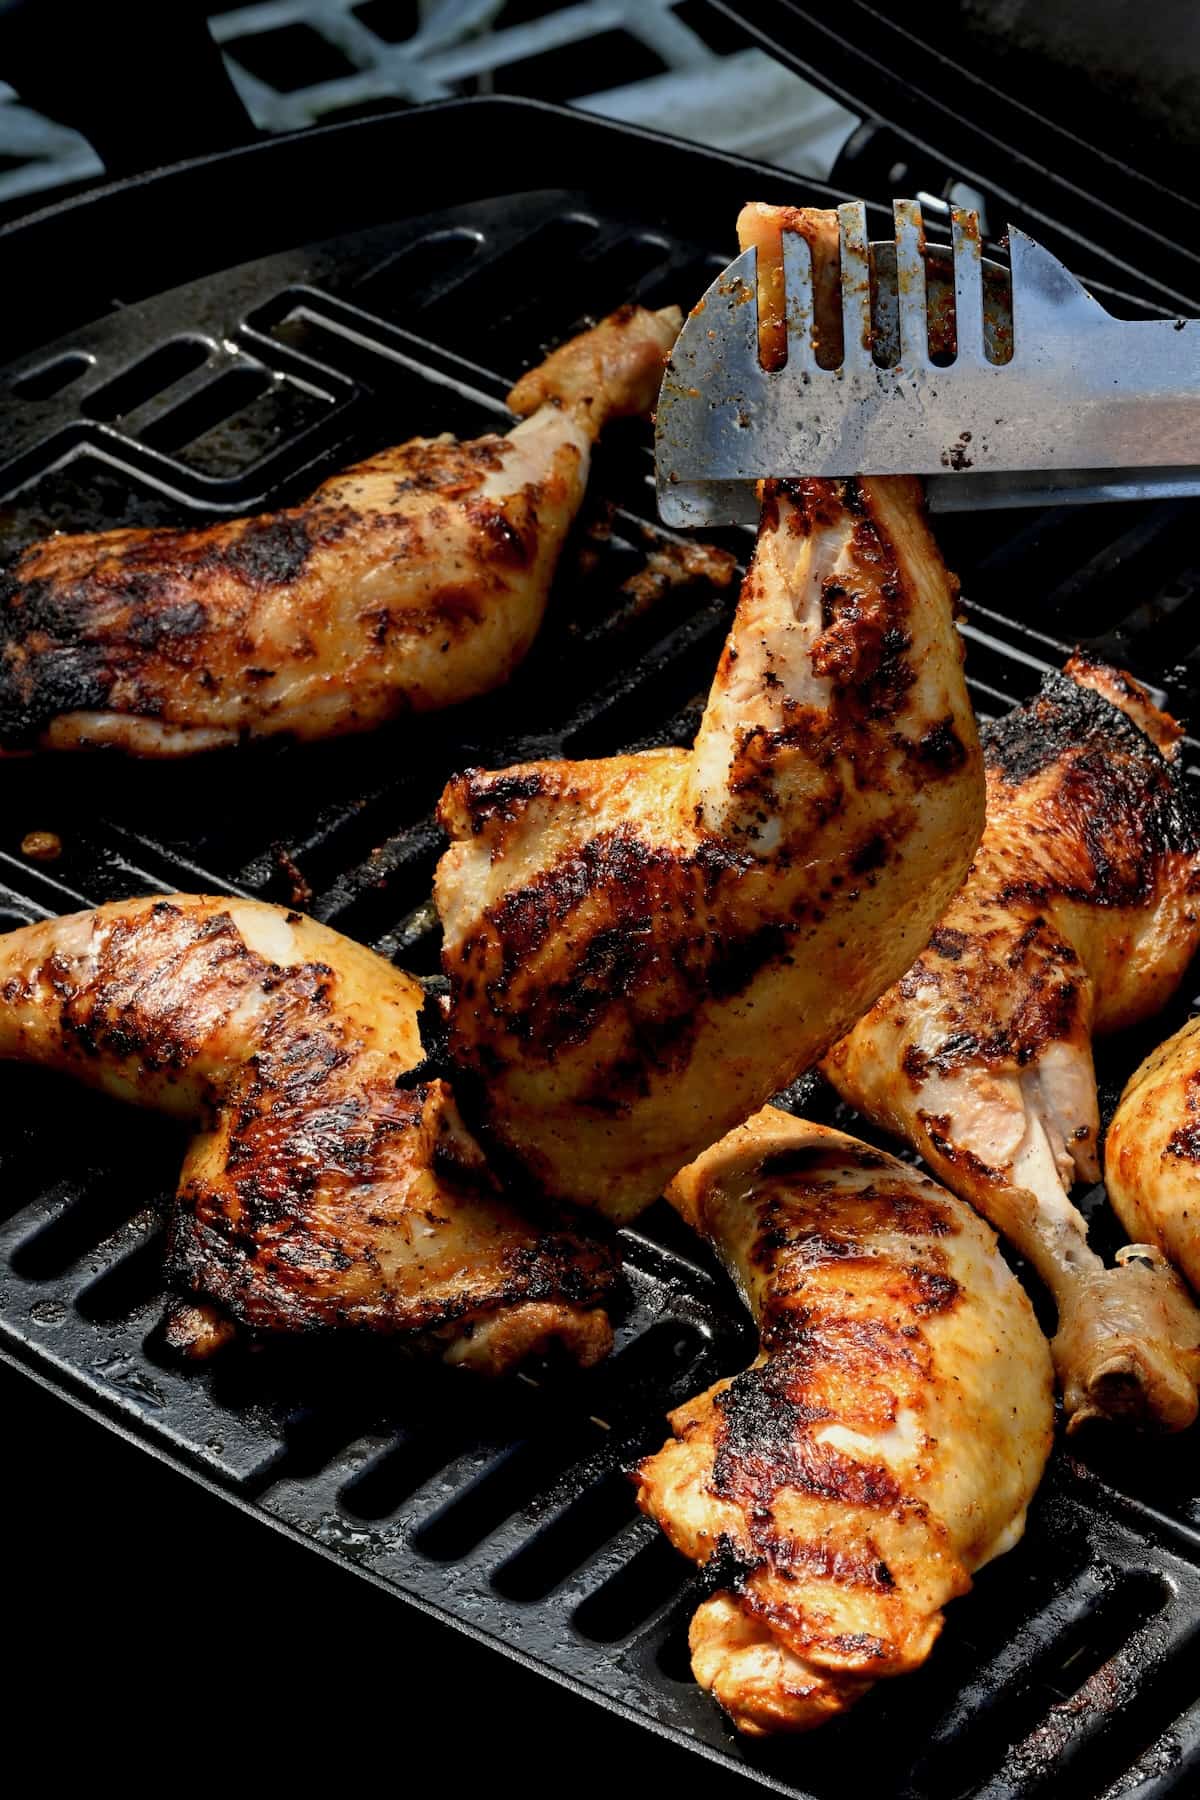 Grilled chicken quarter being removed from the grill